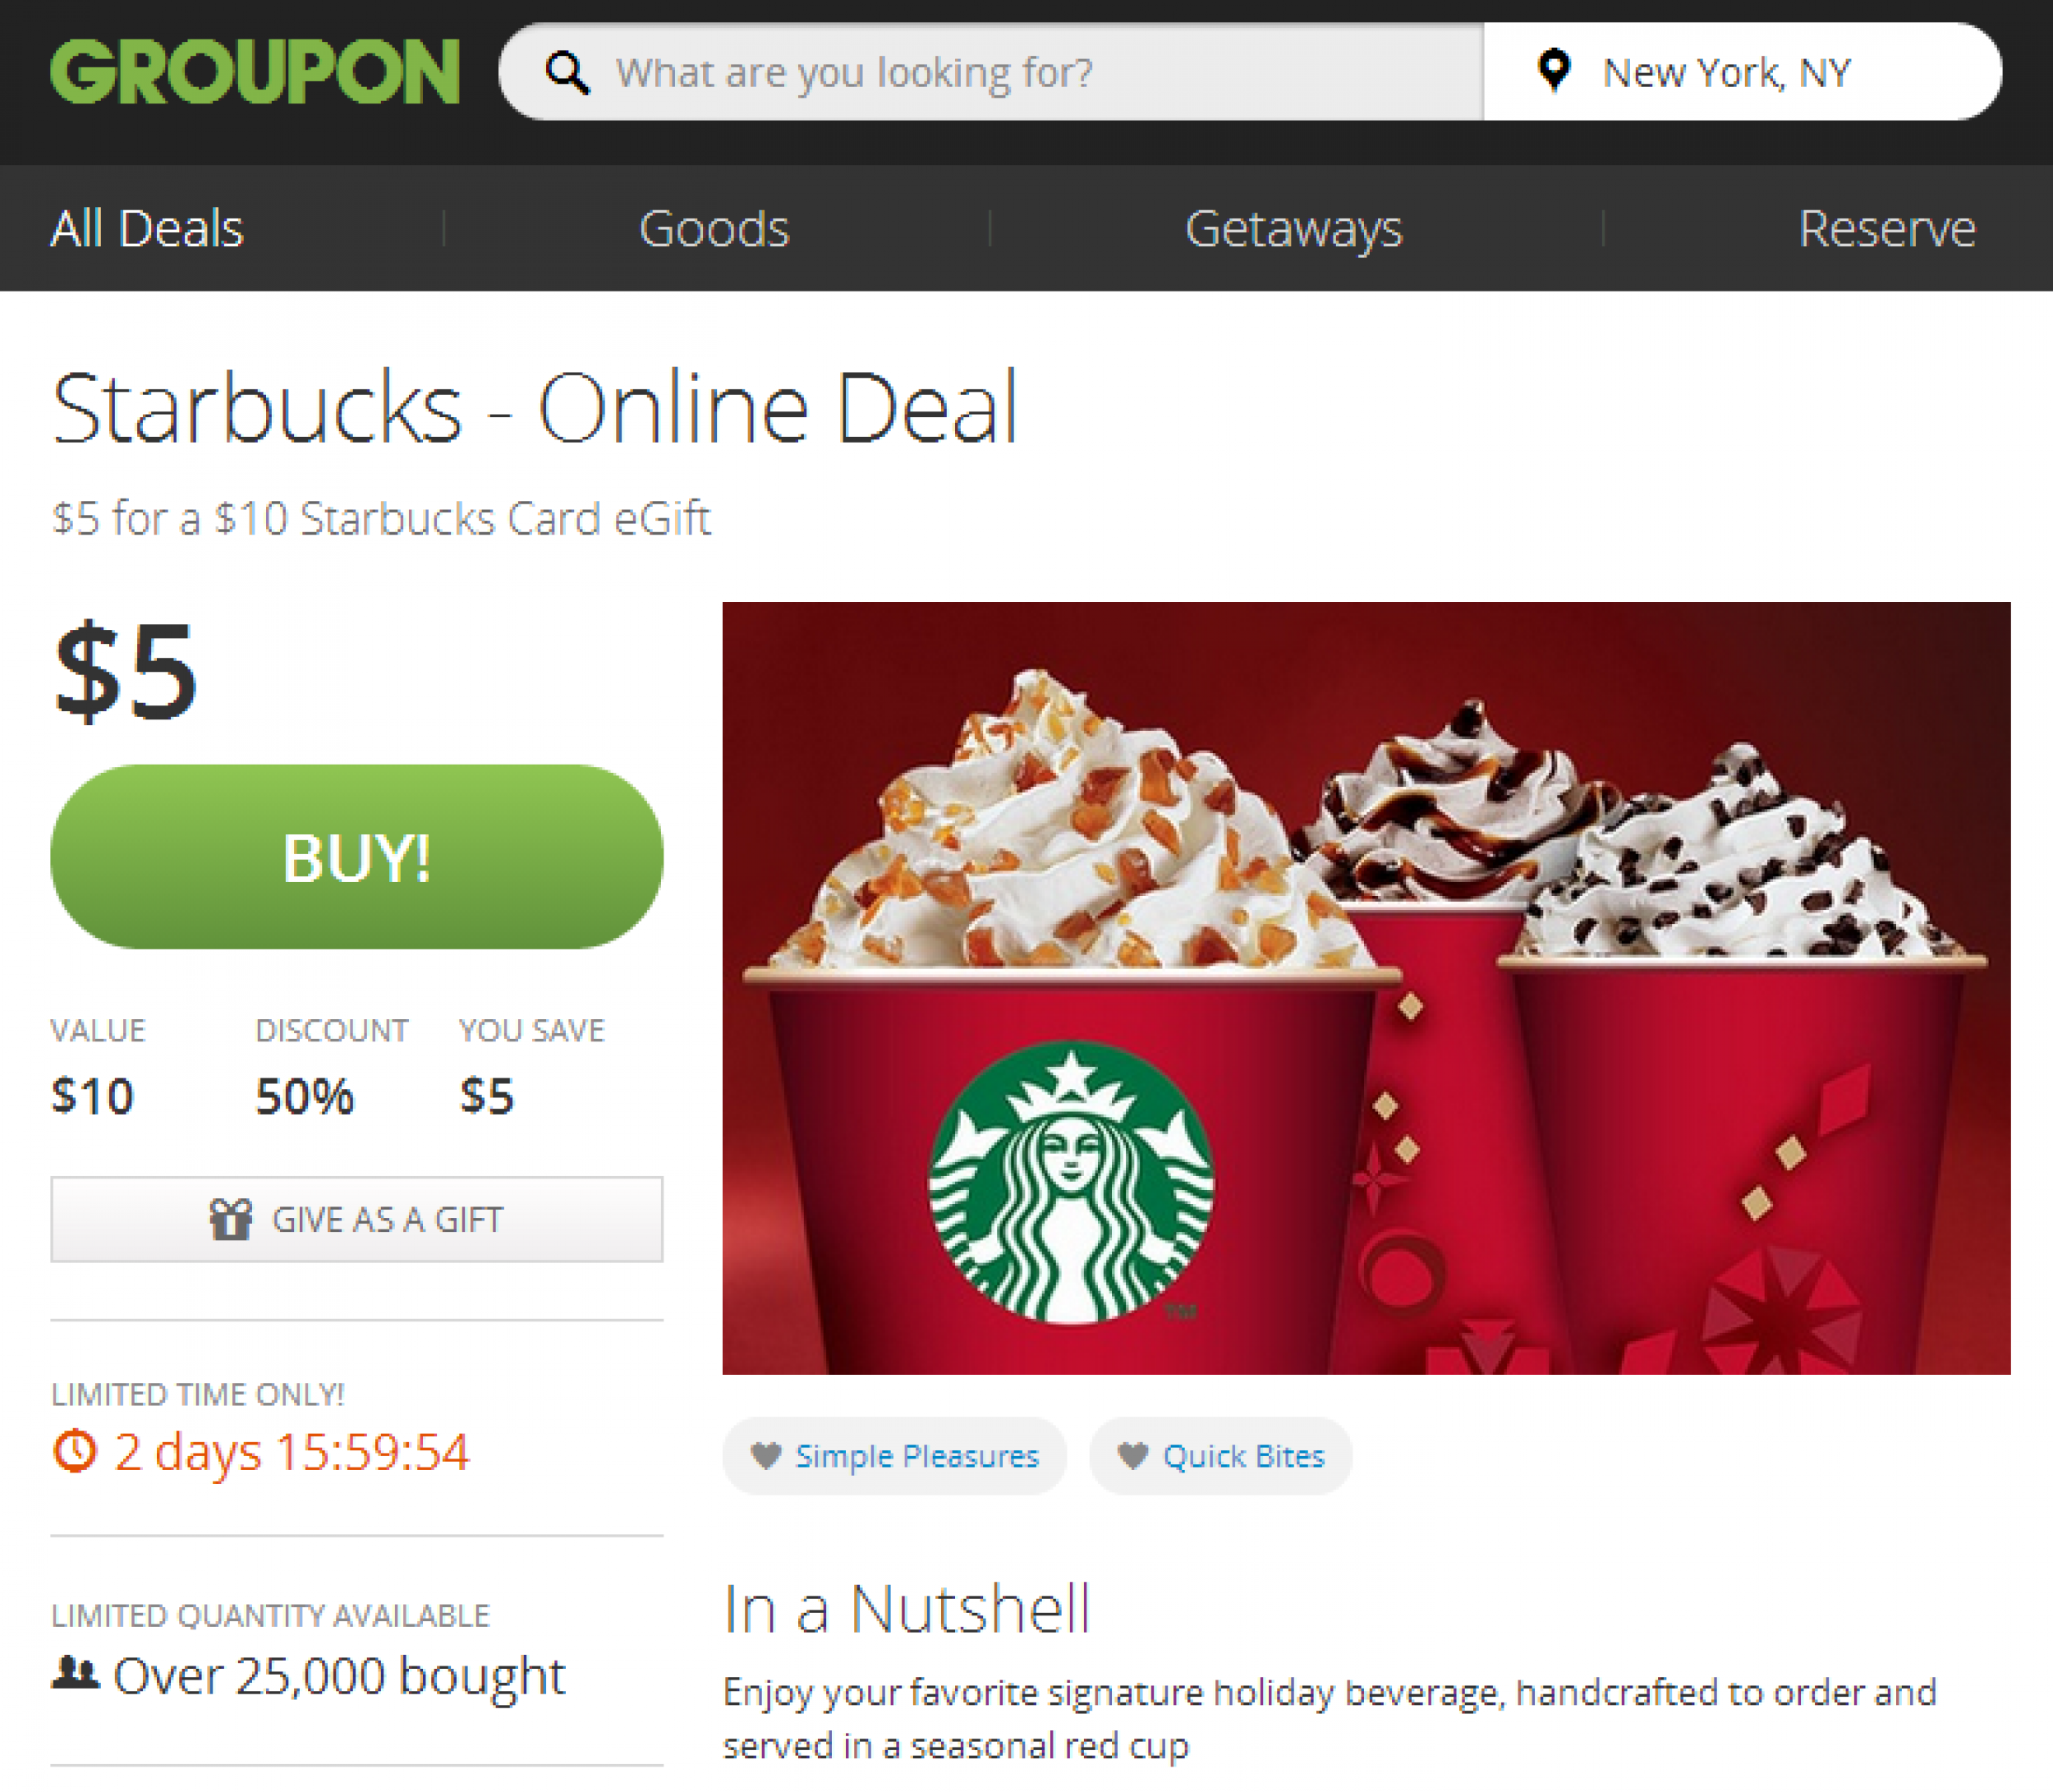 starbucks-groupon-deal-buy-for-5-get-a-10-egift-card-how-to-redeem-the-coupon